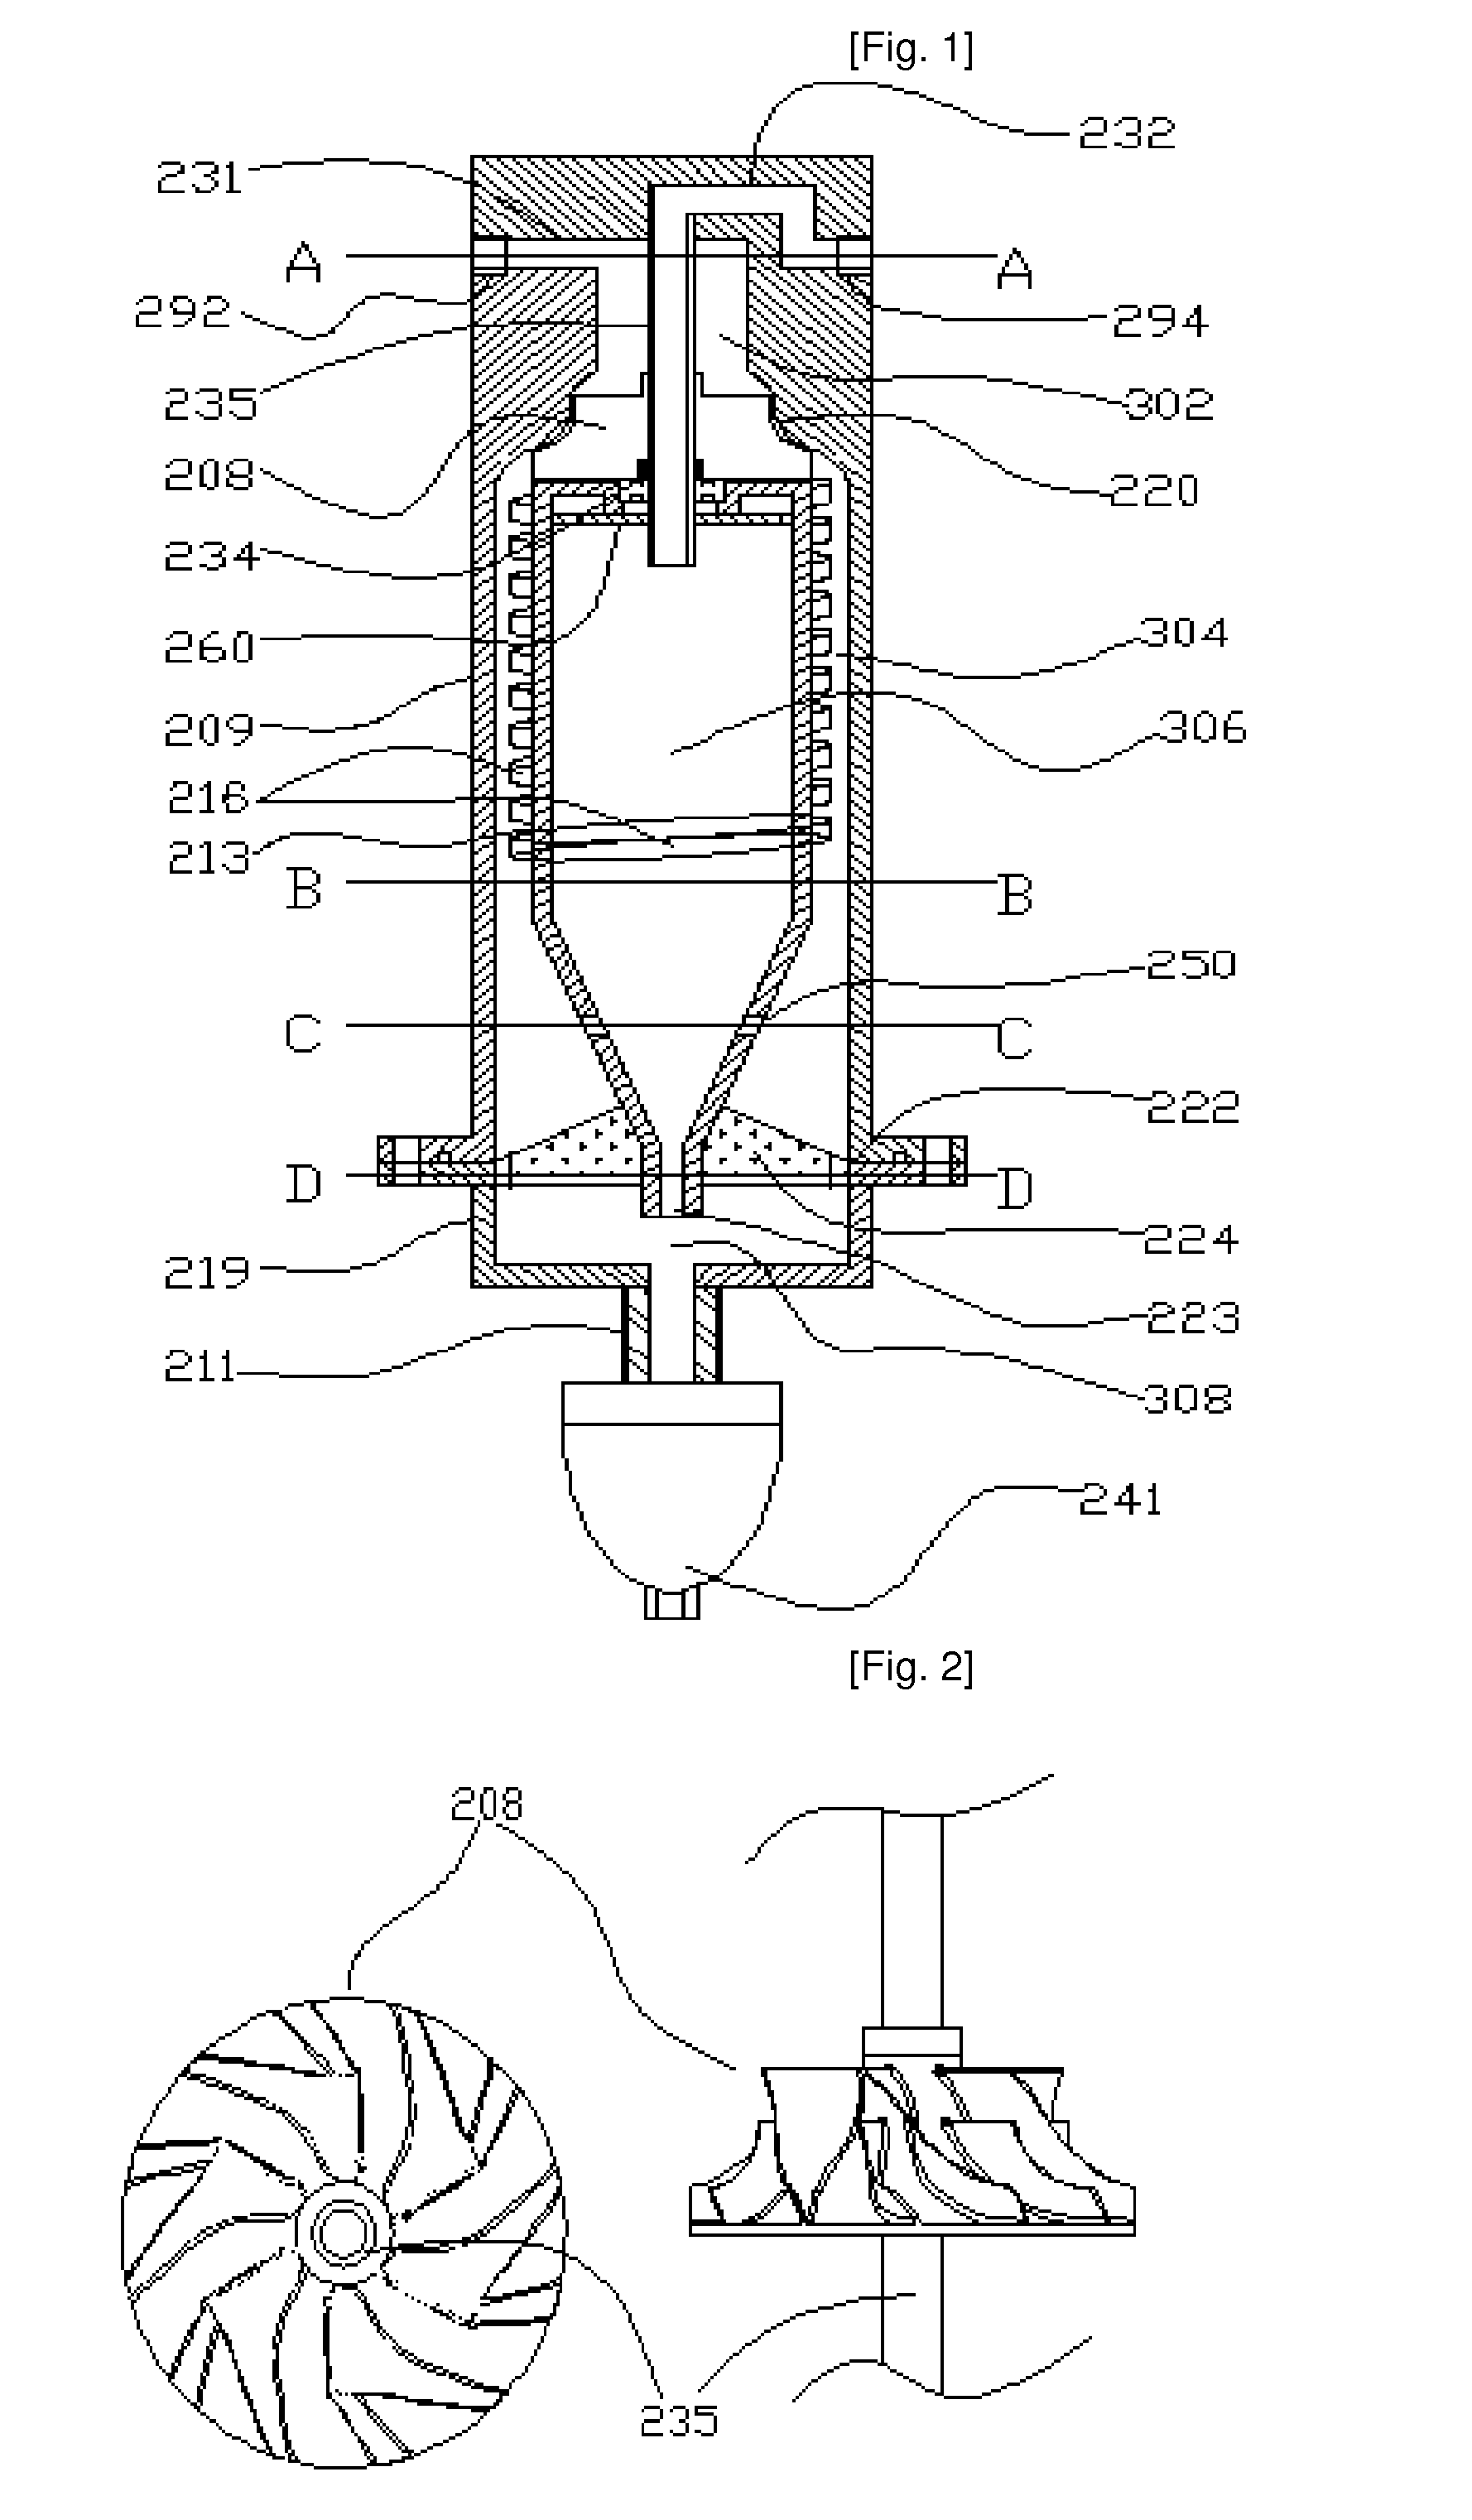 Compressed air cleaner utilizing a centrifugal impeller and spiral grooves